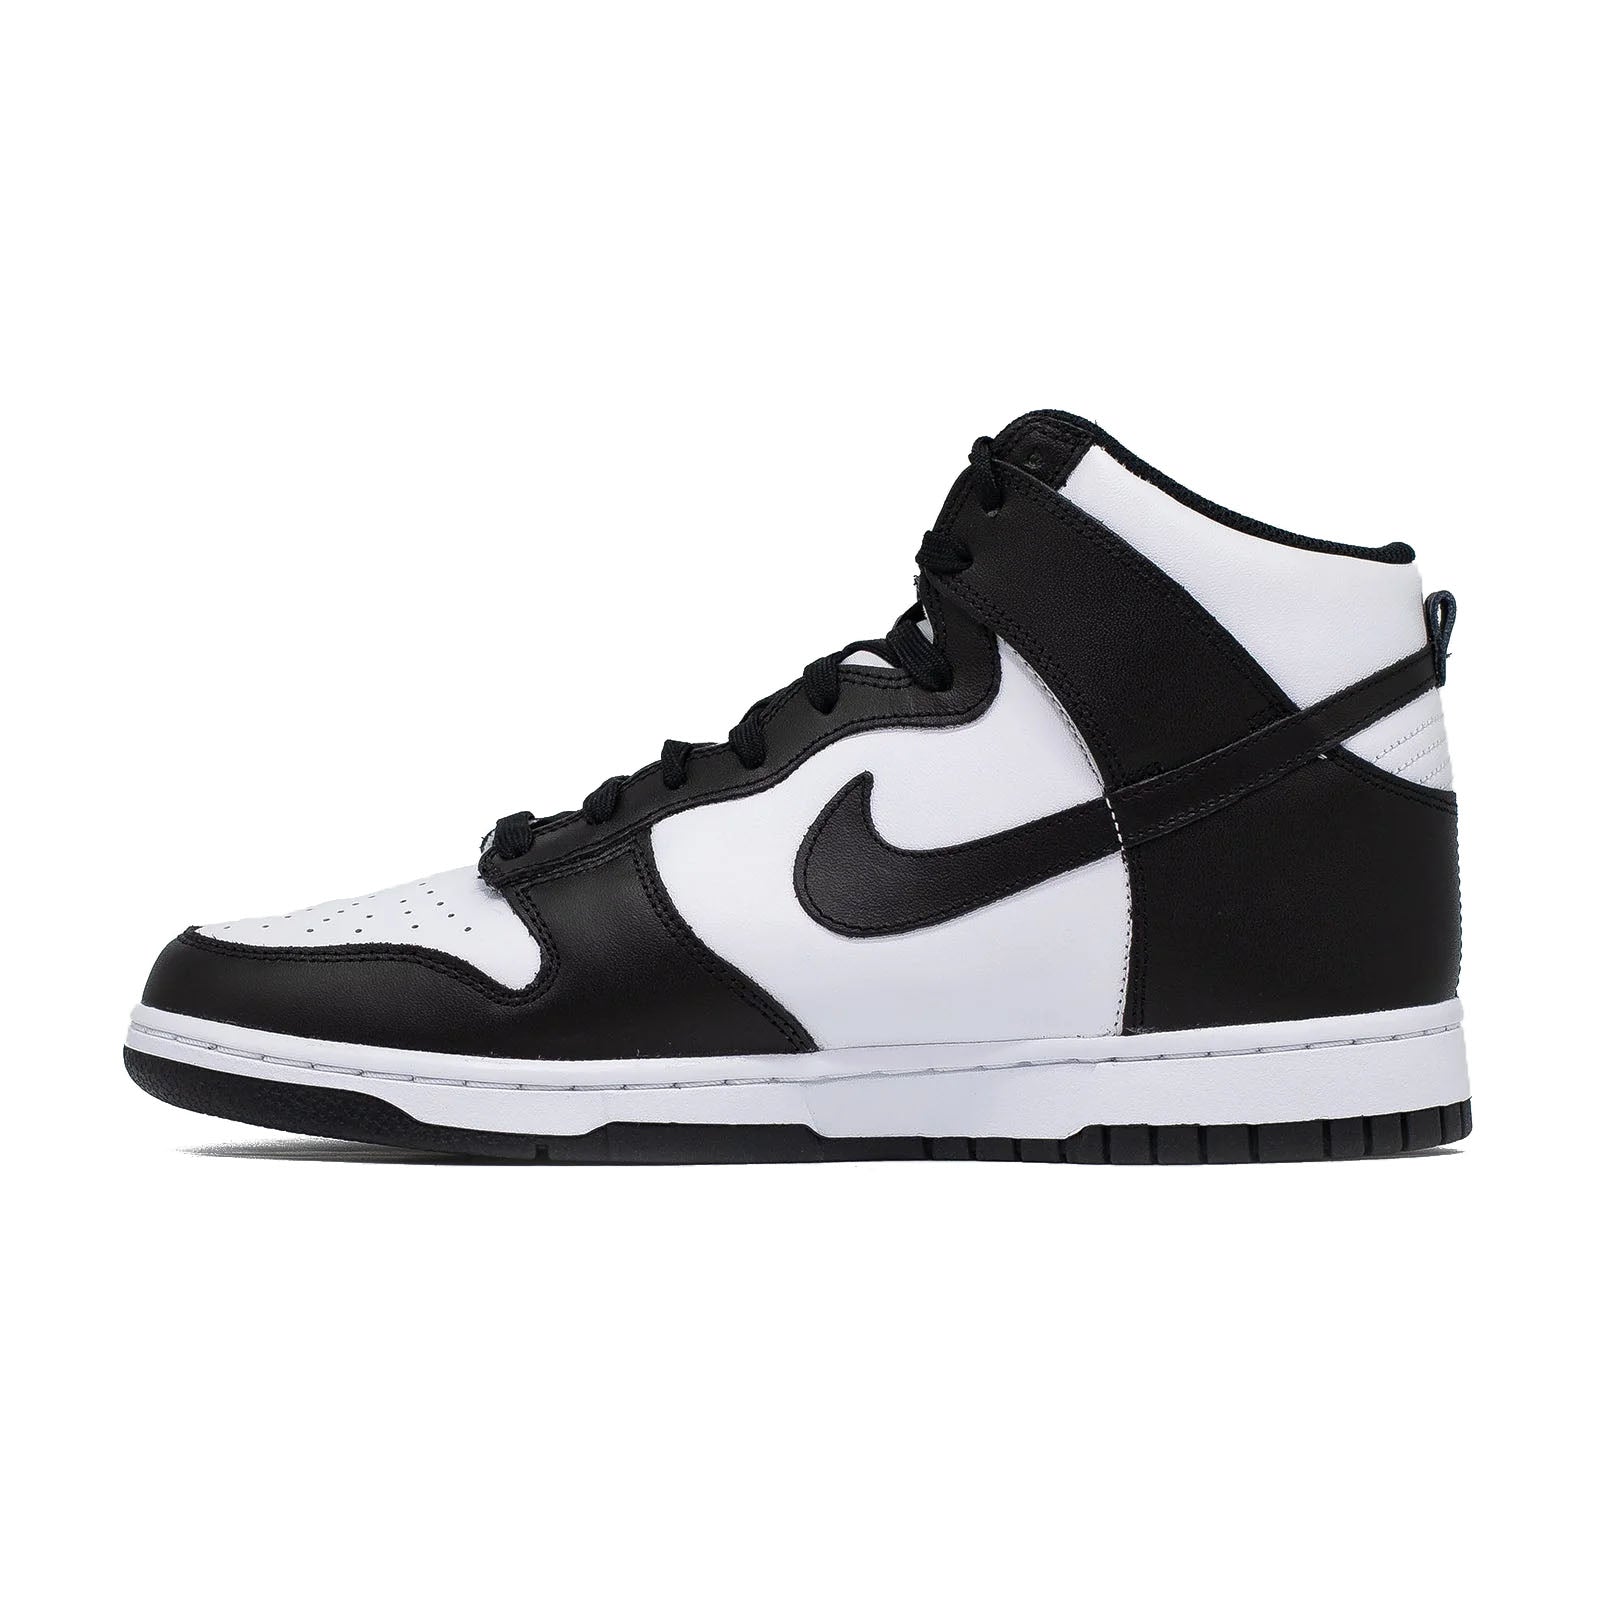 Nike embroidered dunk High (GS), Black White (2021)